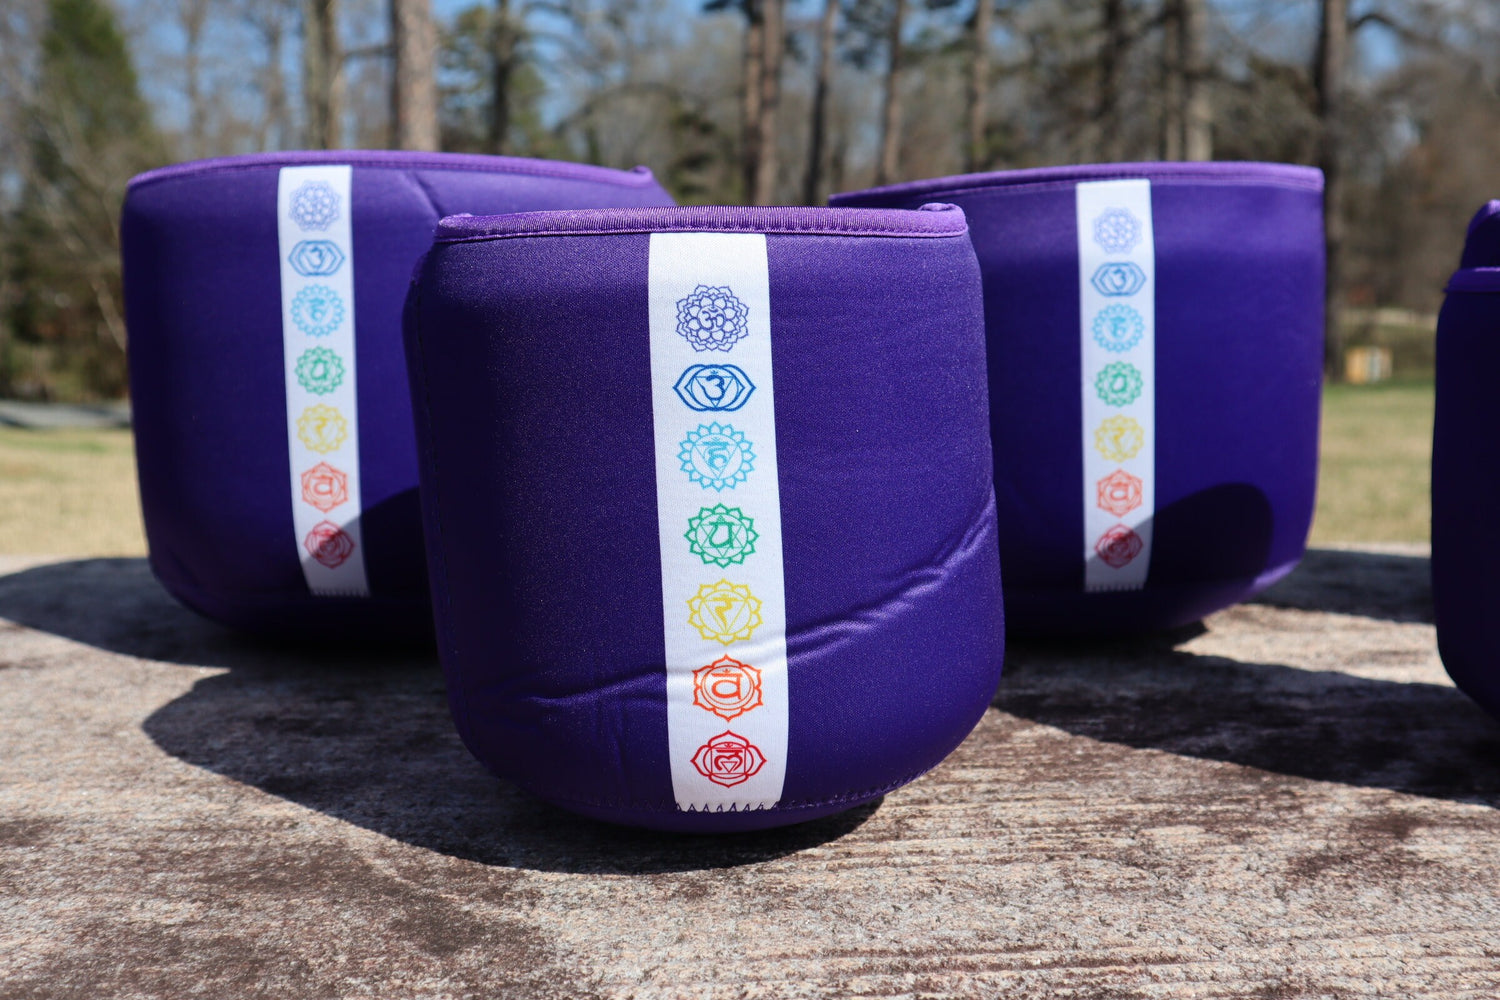 Carry Bag - Flower Of Life, Chakra Engram, Purple, Sizes 6-12, Protective Carry Bag for Singing Bowls